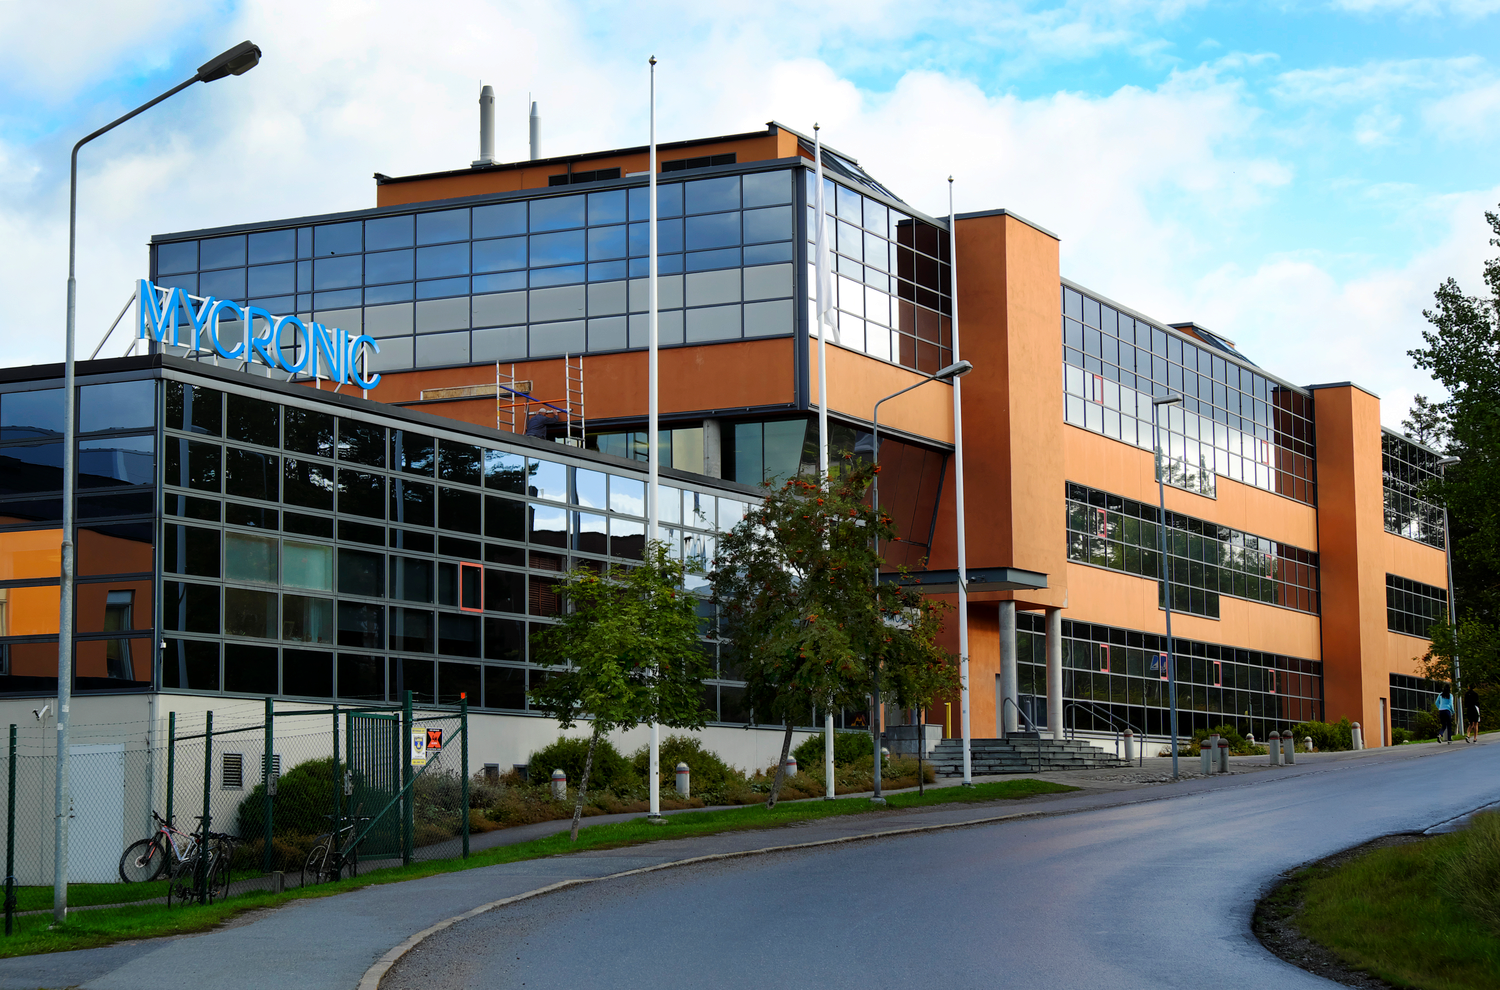 Annual general meeting for Mycronic took place on the headquarter in Täby, May 9 2023.